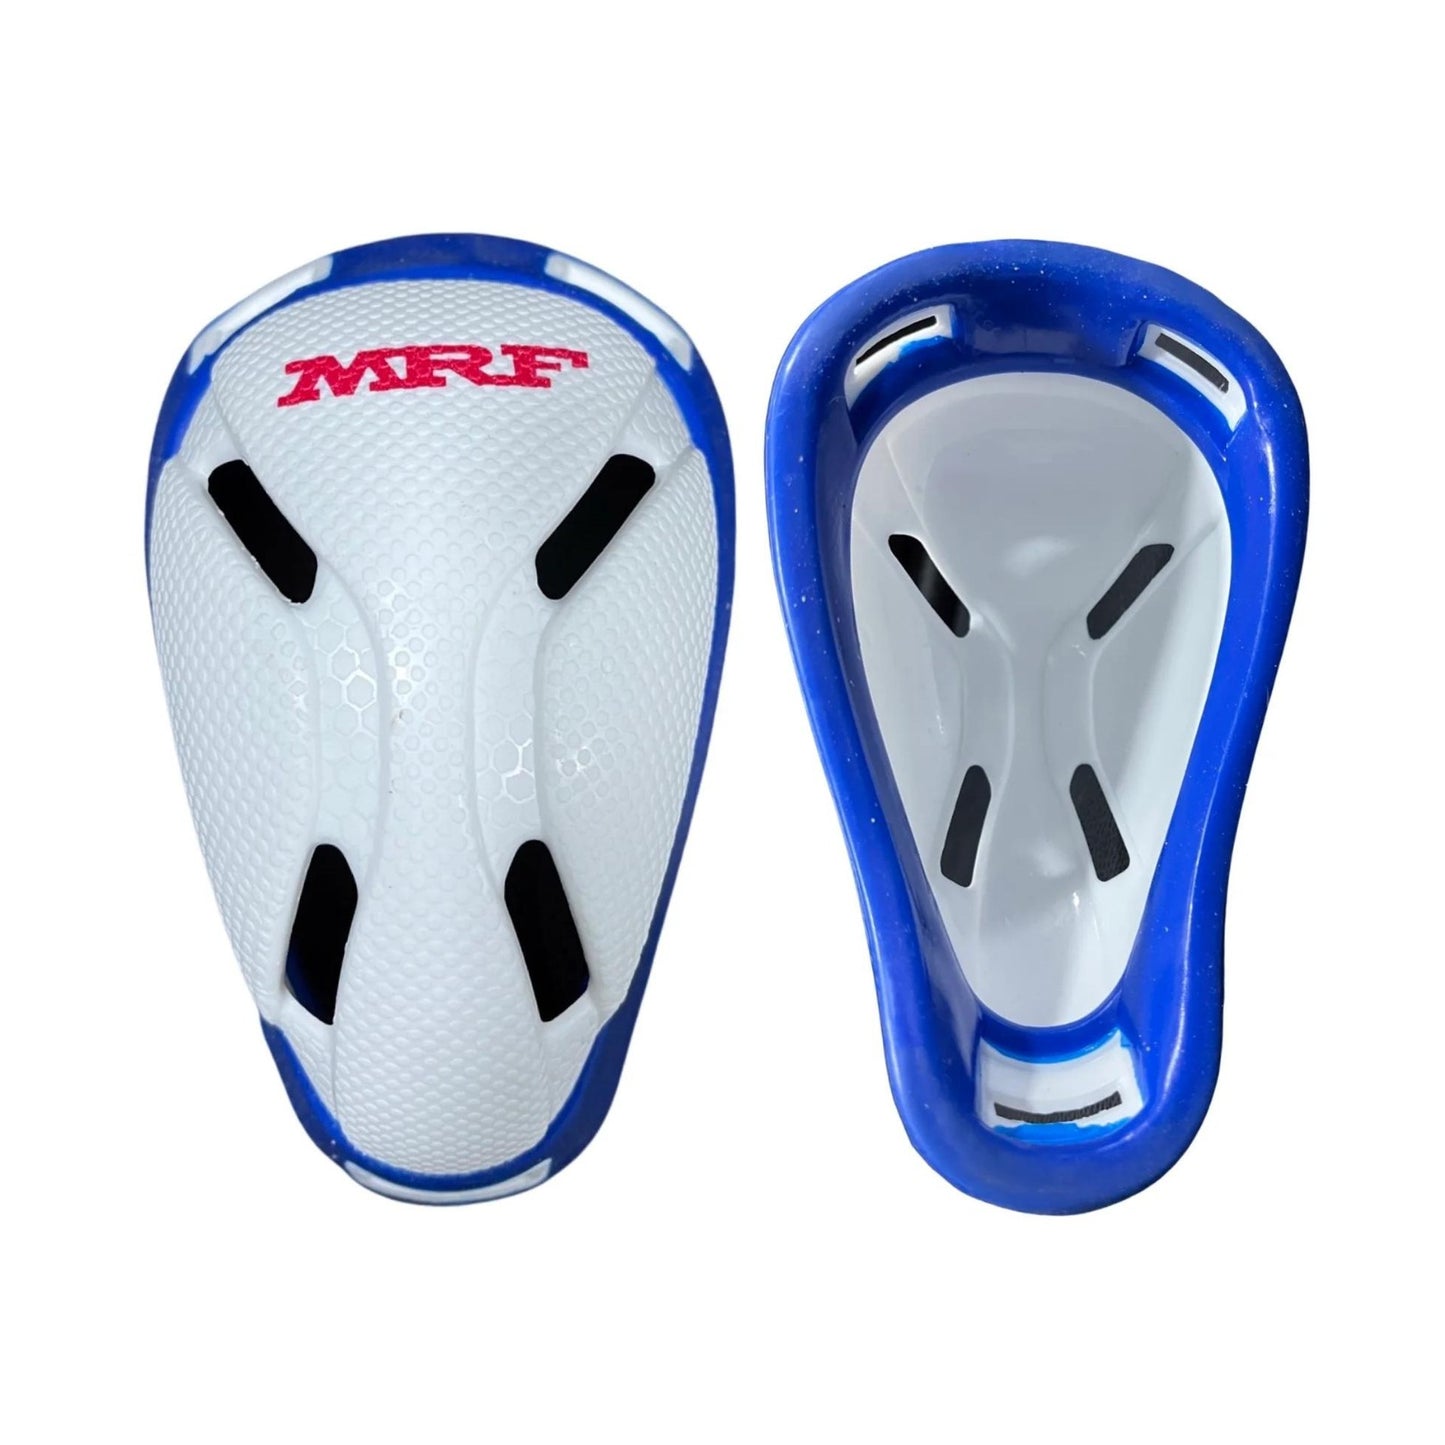 MRF Abdomen Guard Protective Gear for Cricket & Other Sports Mens & Junior